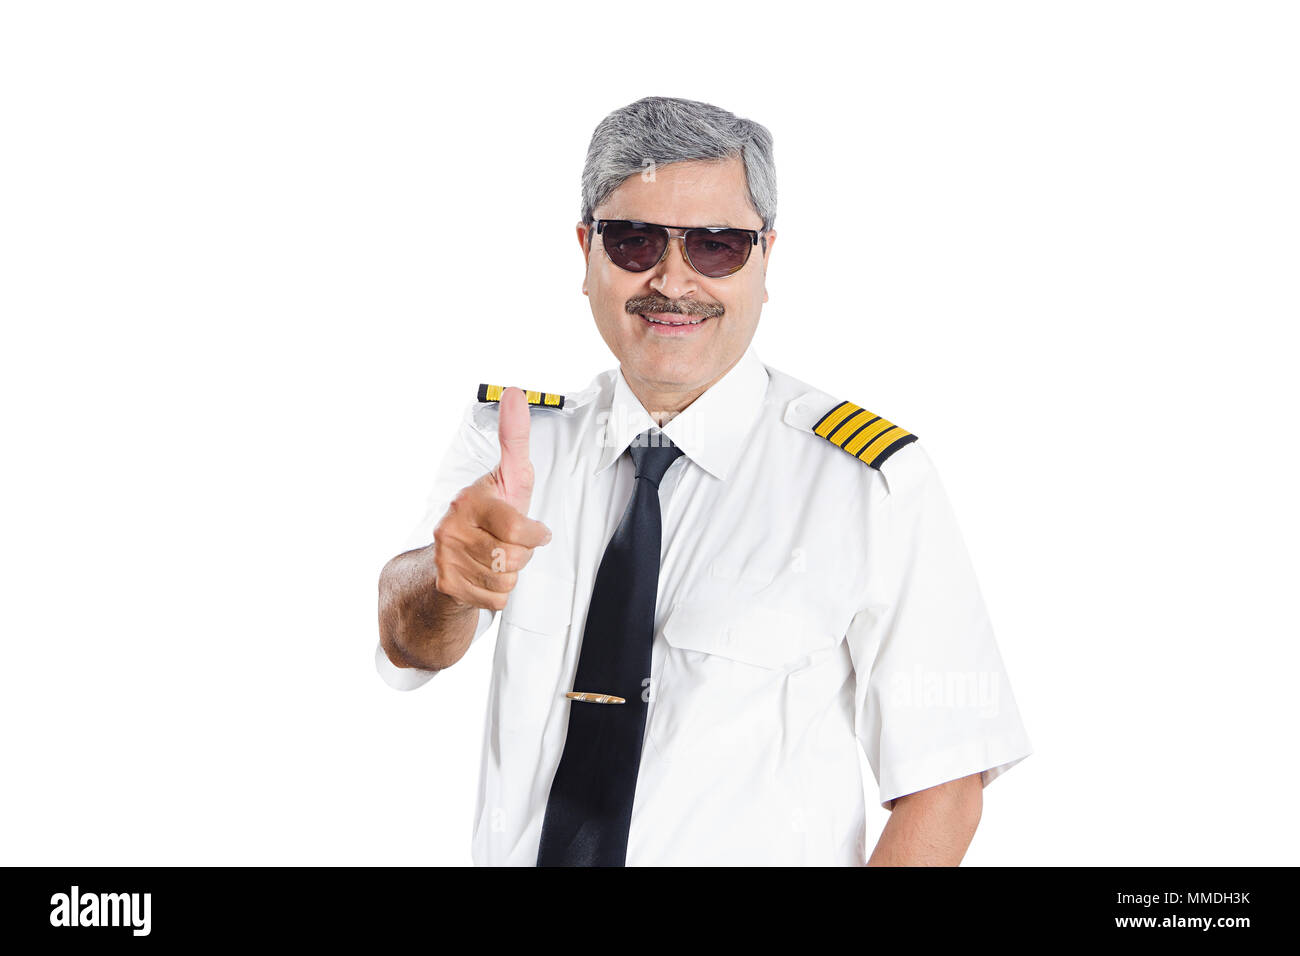 Happy One Old Man airline Pilot Showing Thumbs-up Goodnews Stock Photo